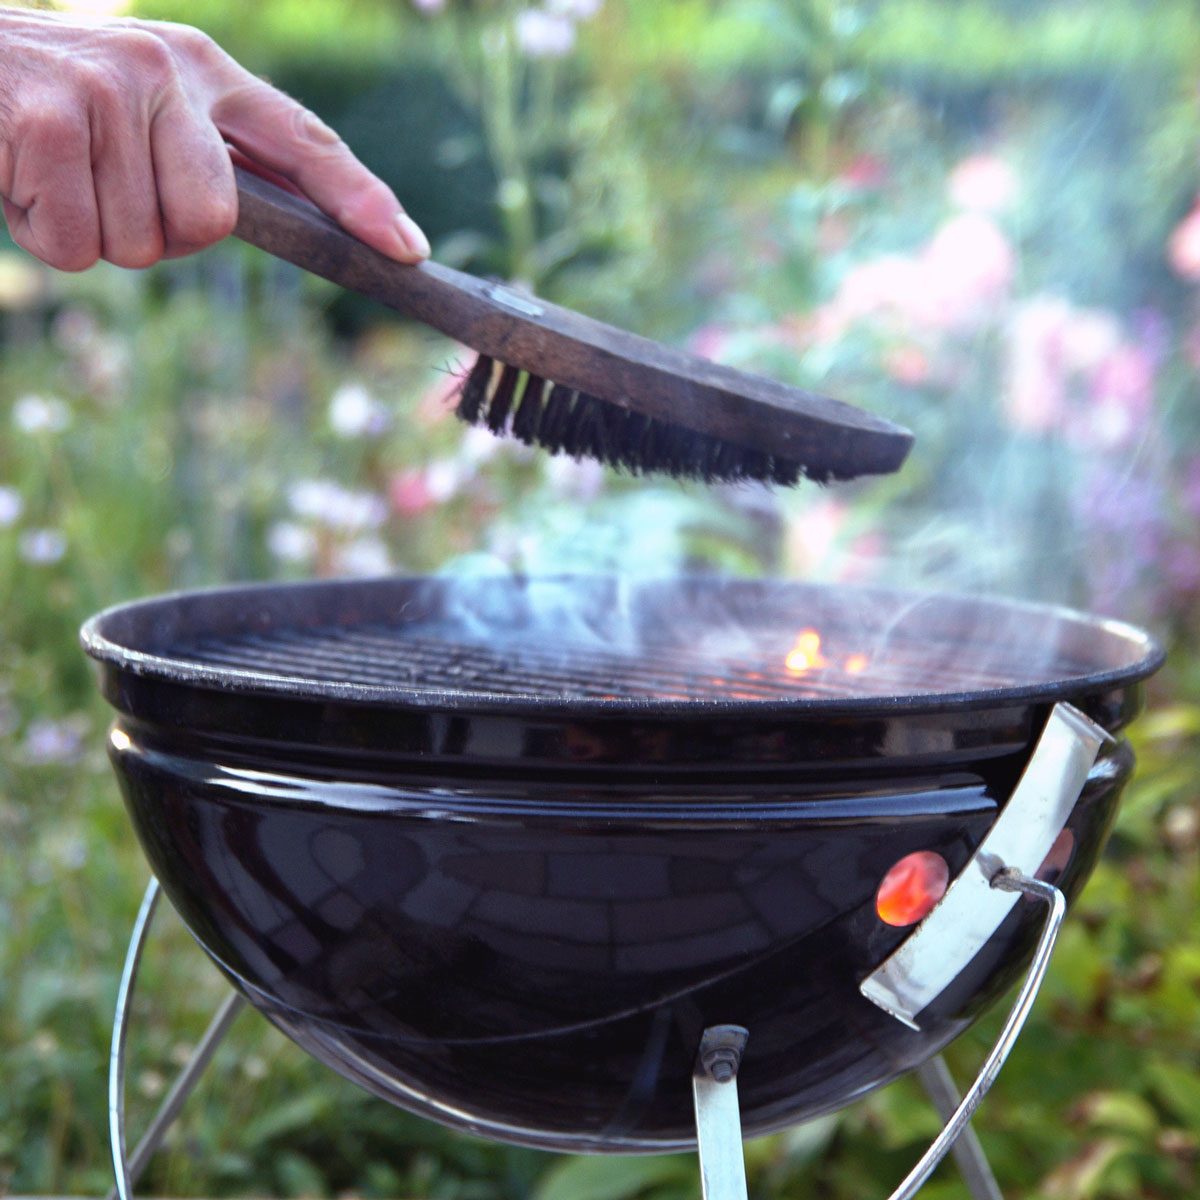 14 Ways to Clean Your Charcoal Grill  The Family Handyman